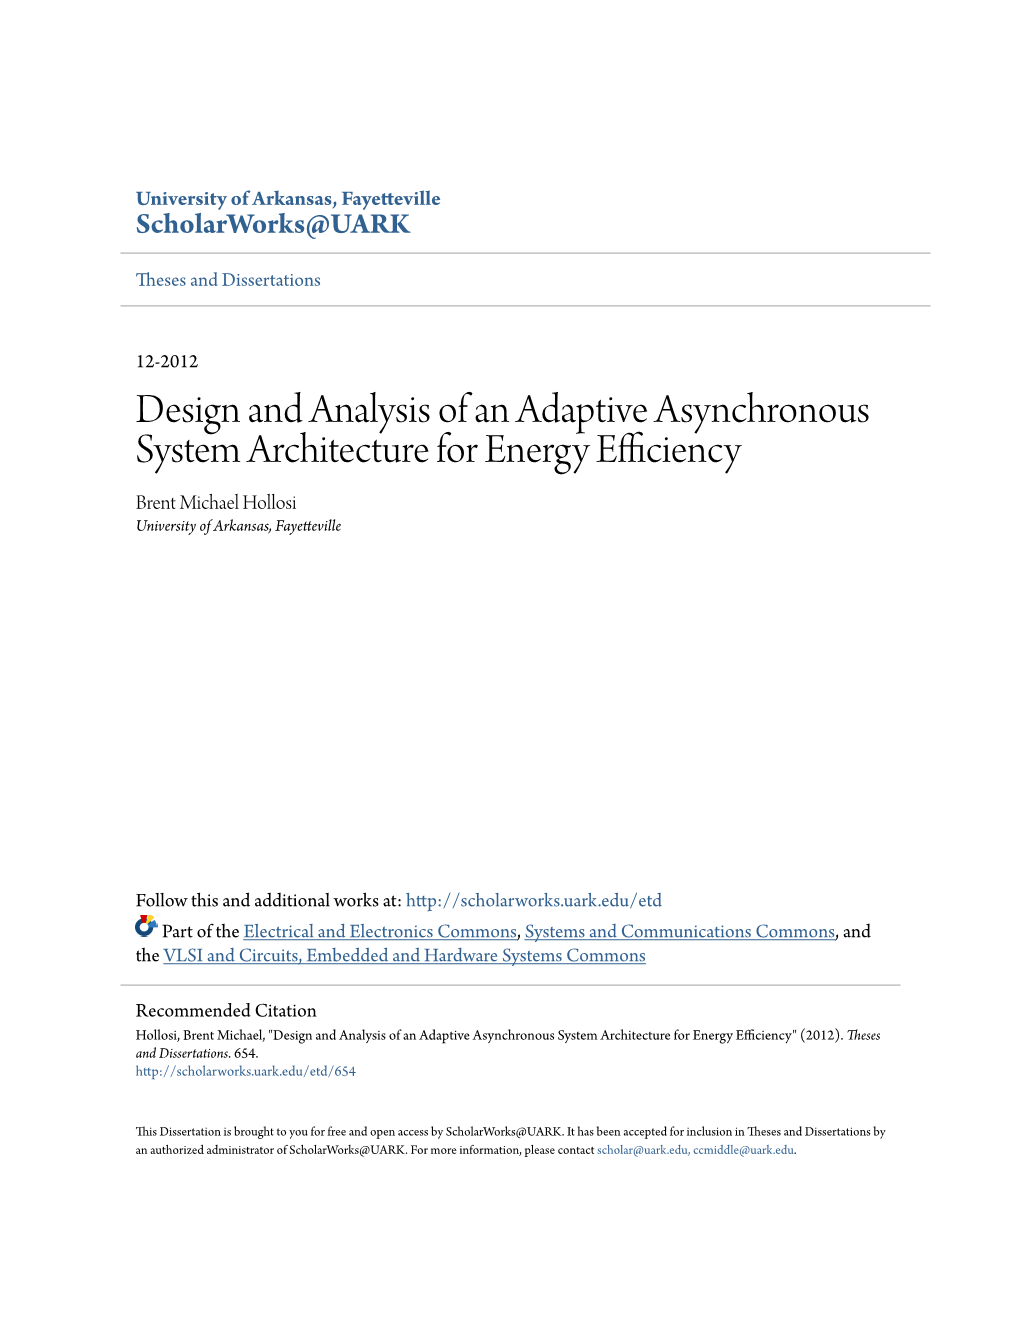 Design and Analysis of an Adaptive Asynchronous System Architecture for Energy Efficiency Brent Michael Hollosi University of Arkansas, Fayetteville